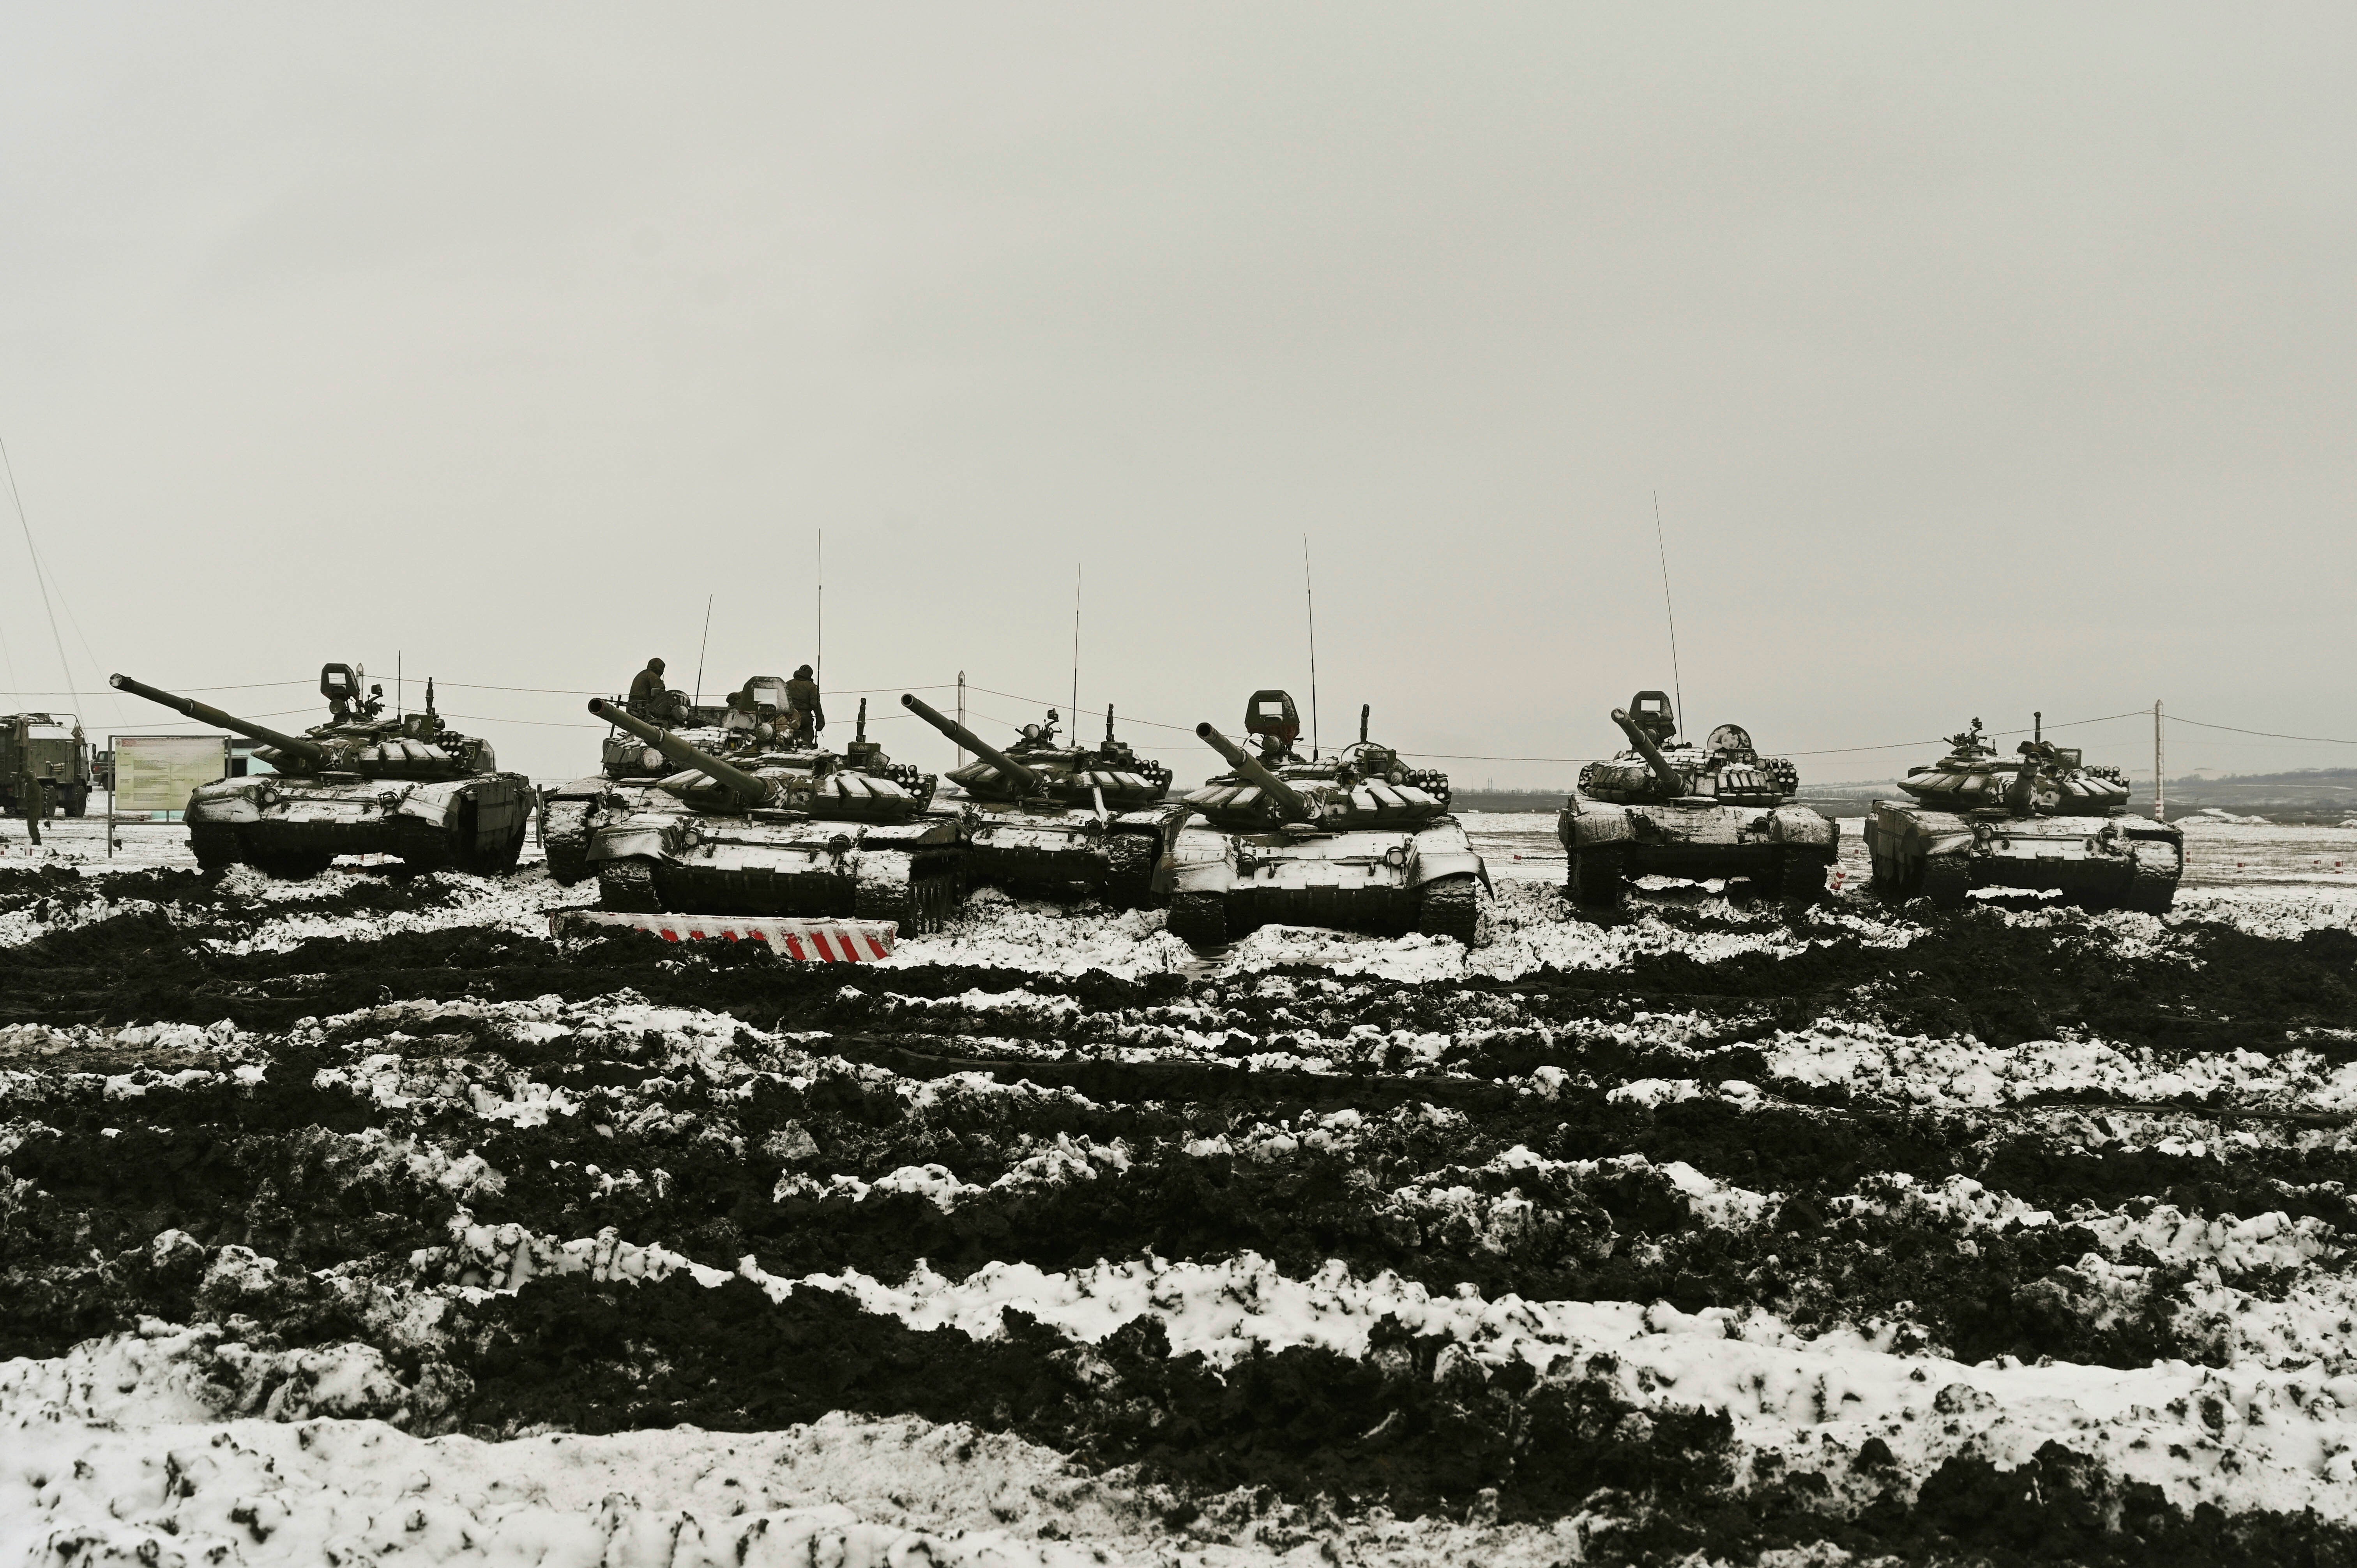 Russian tanks take part in drills at the Kadamovskiy firing range in the Rostov region in southern Russia